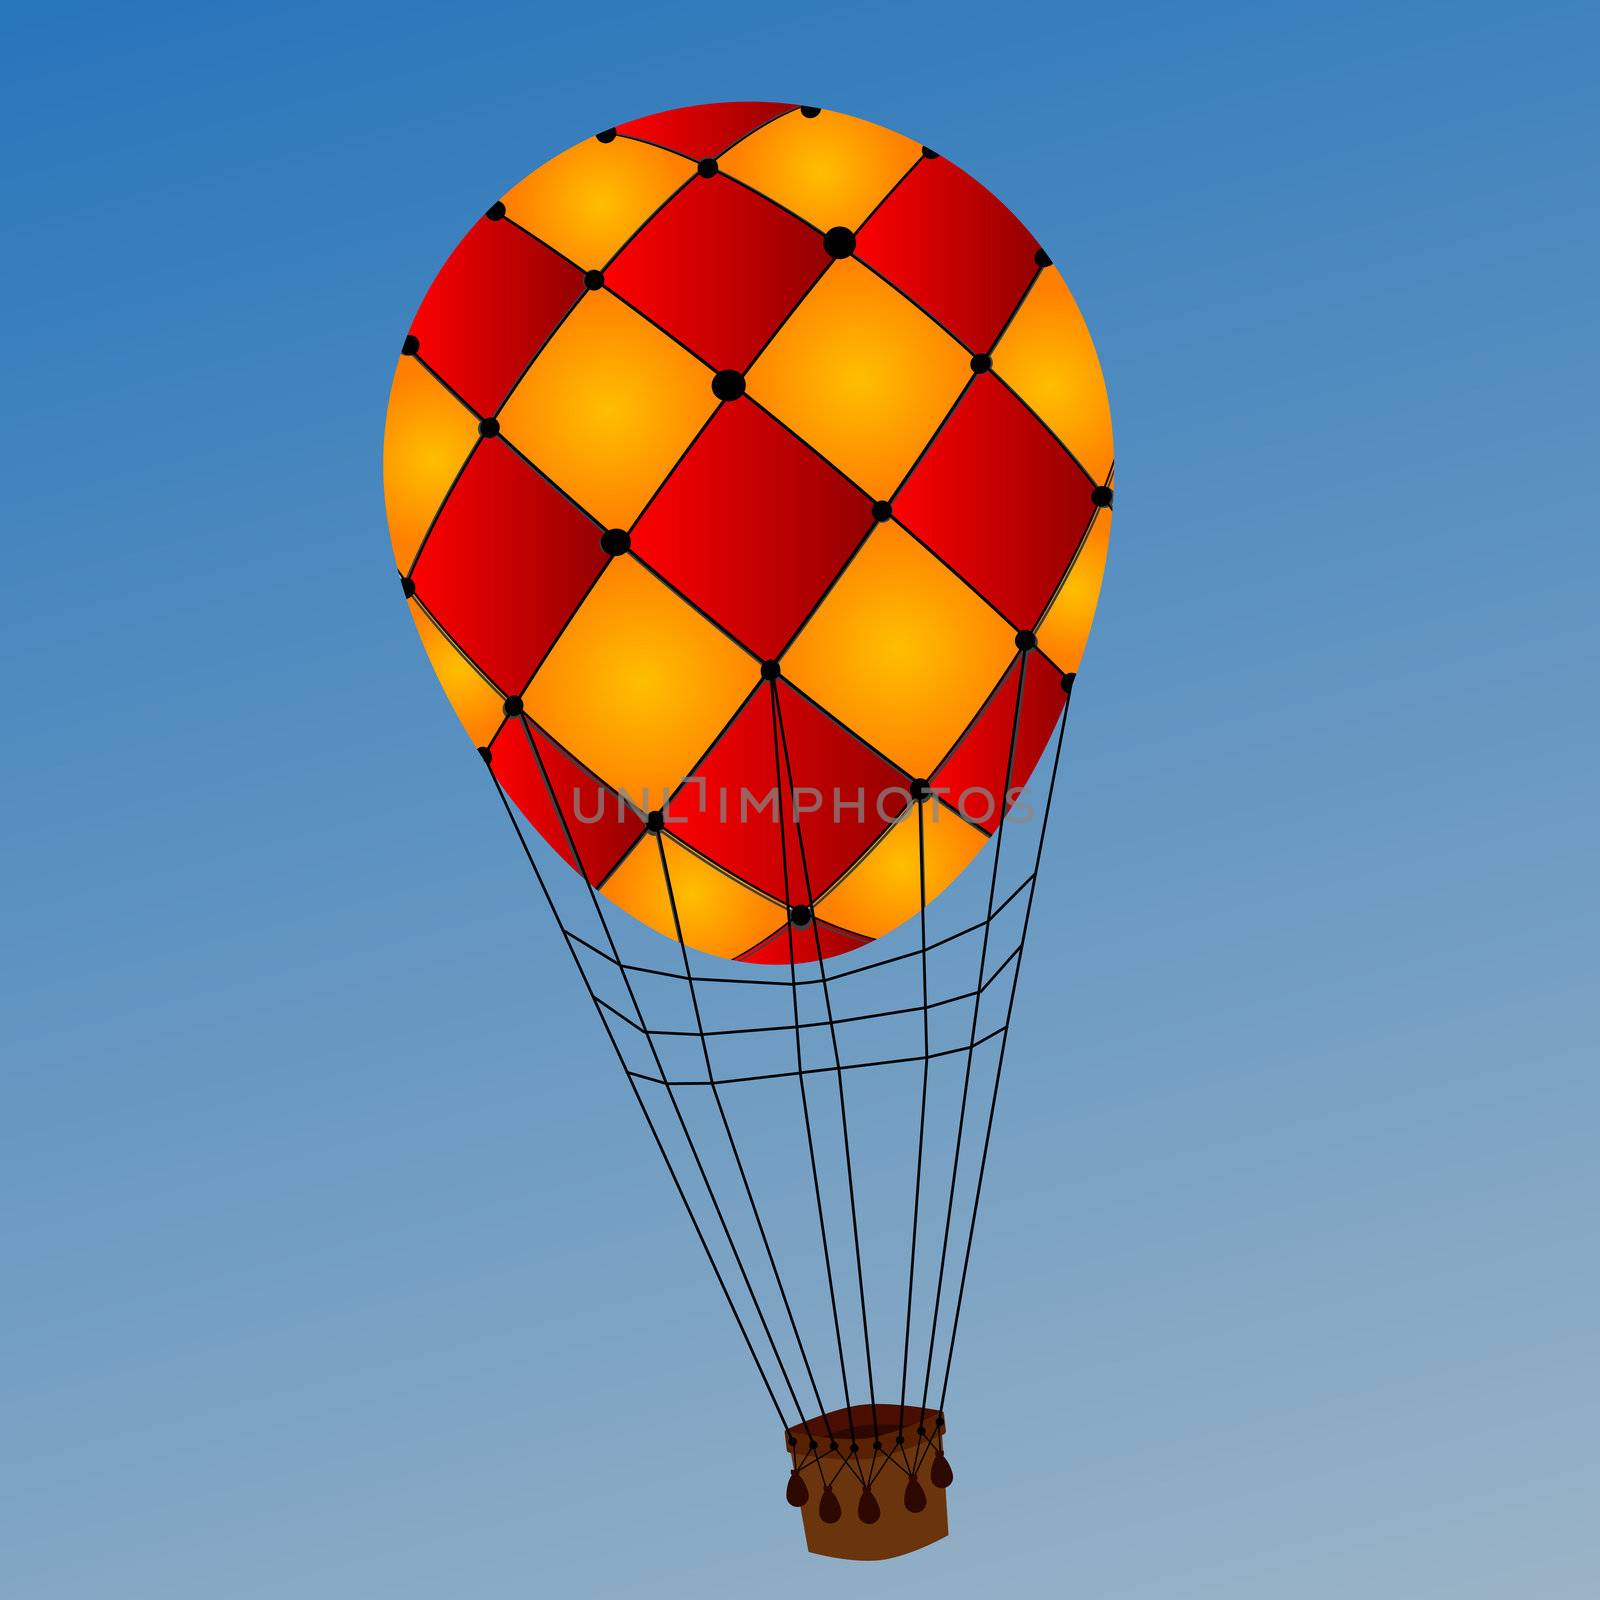 Image shows a hot air balloon over a clear blue sky background